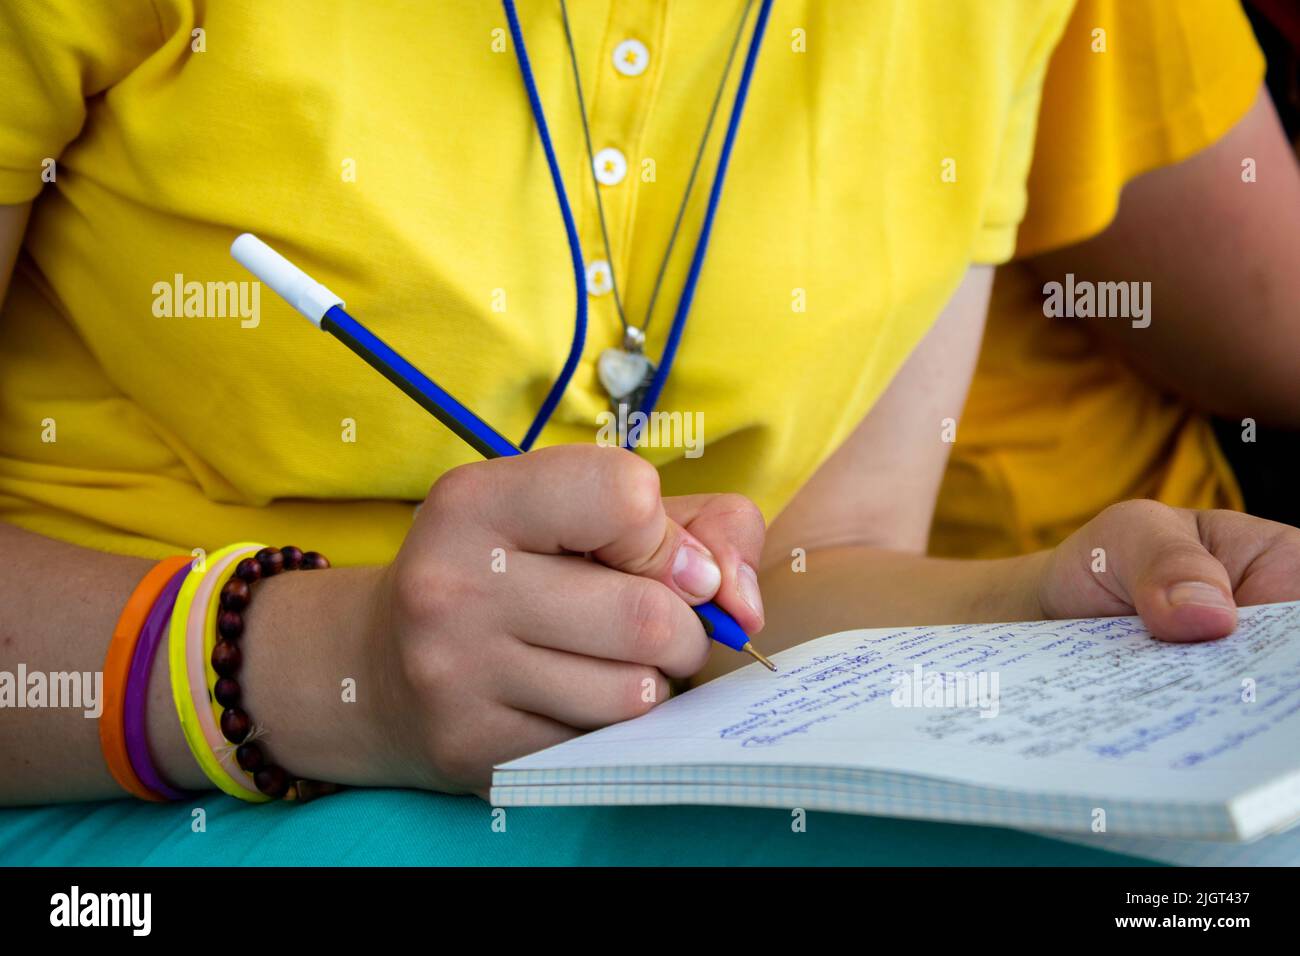 girl writes information in a notebook Stock Photo